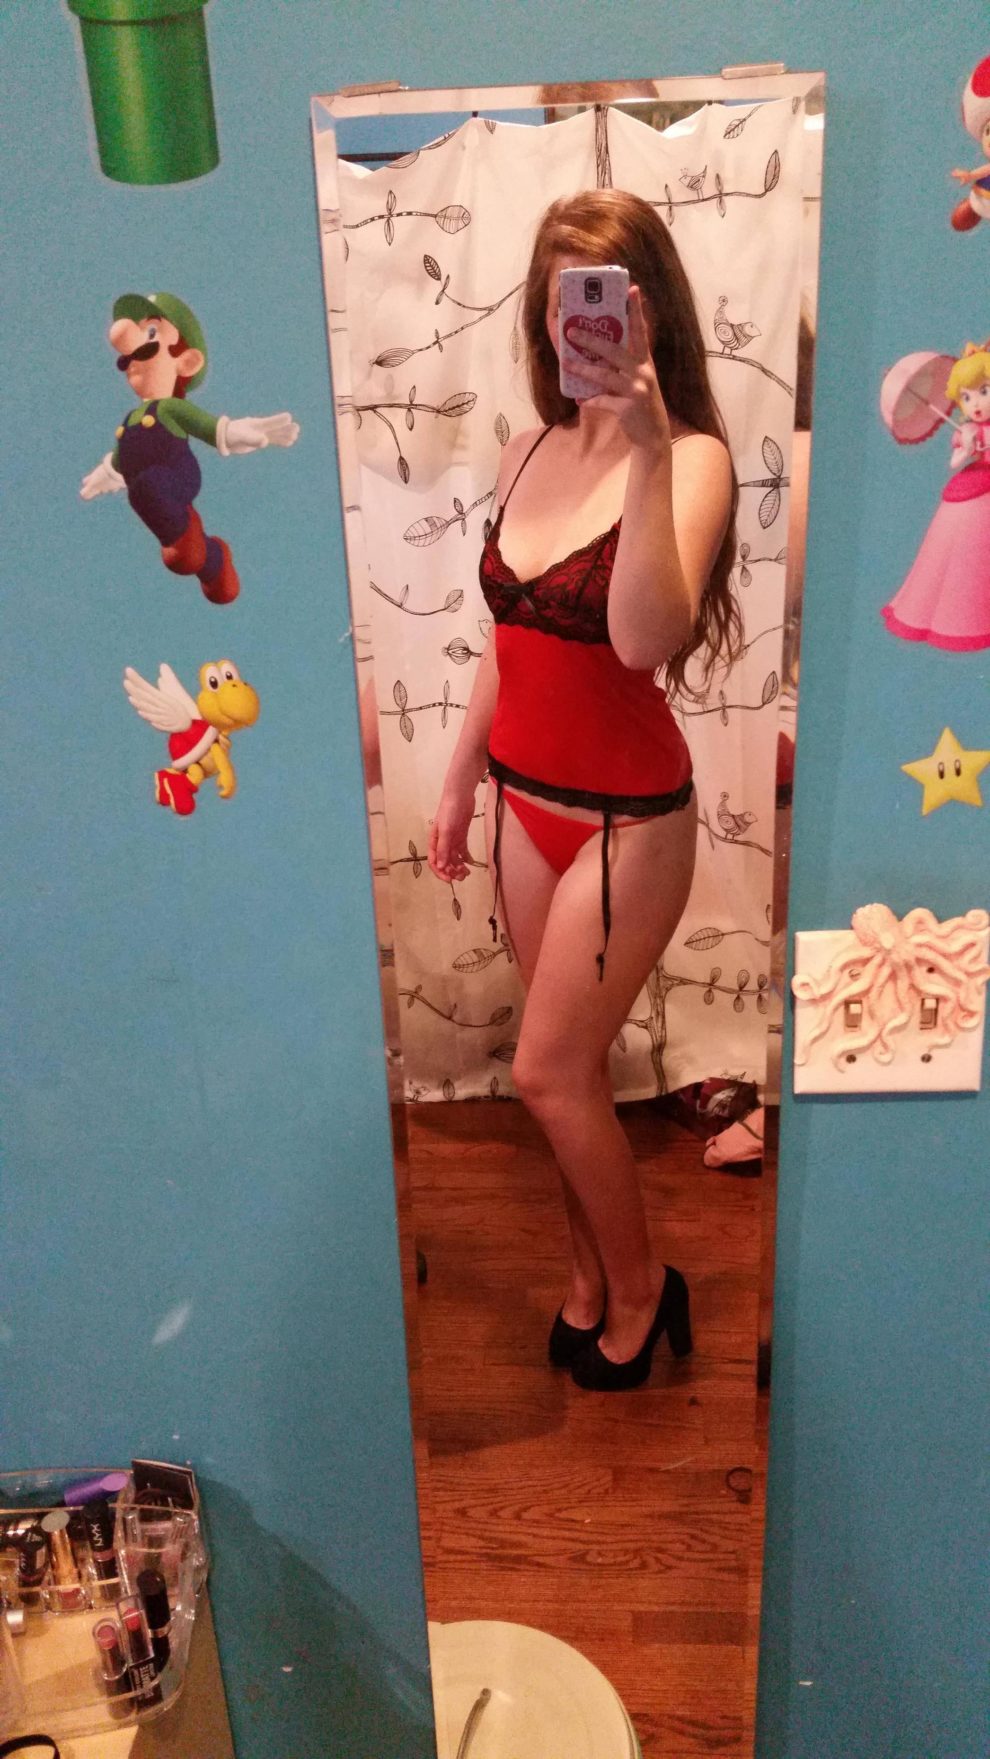 In red and in heels